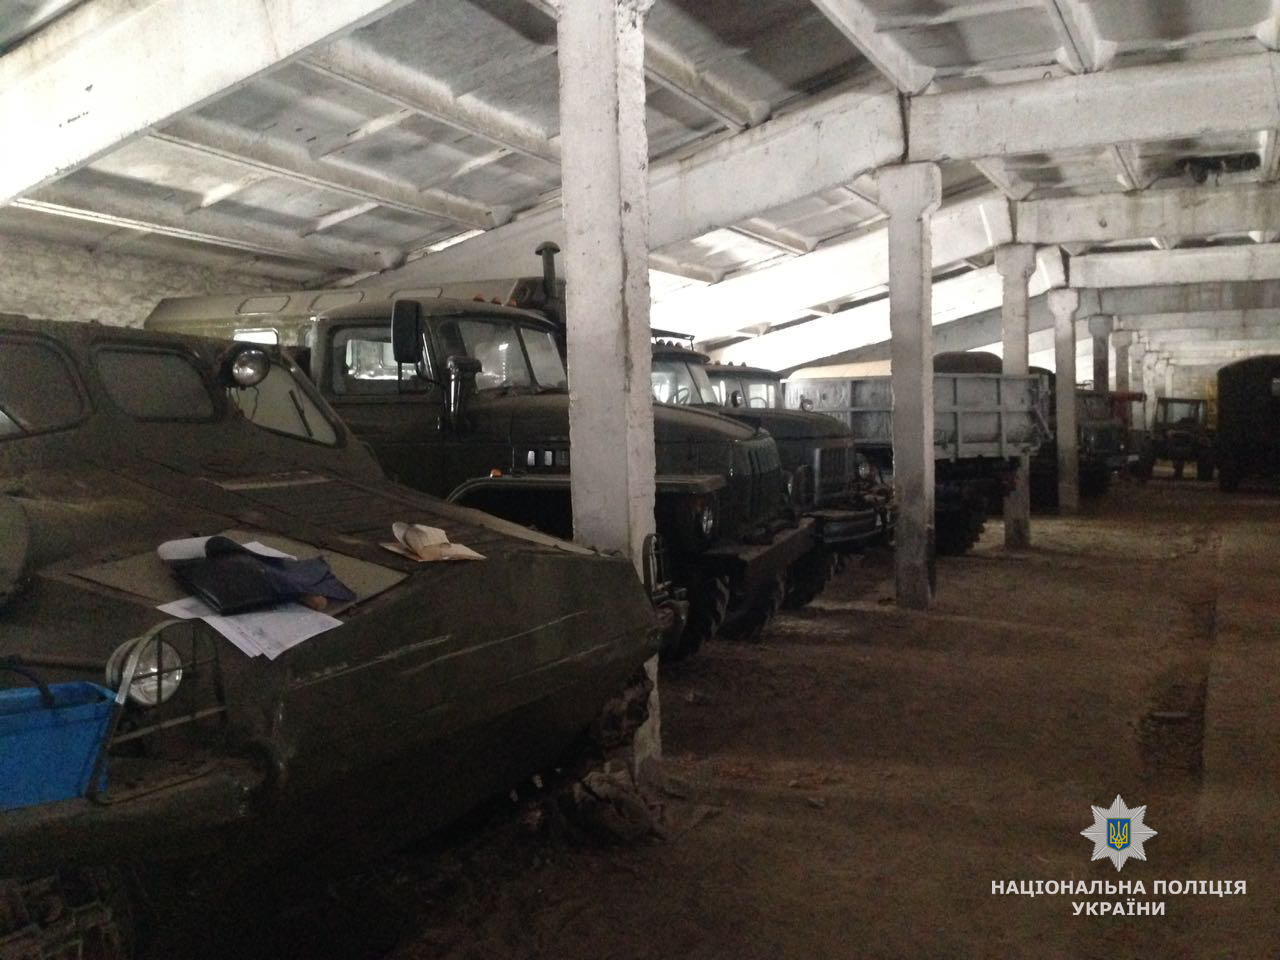 Military hardware found by National Police that was allegedly plundered from military bases and put up for sale.